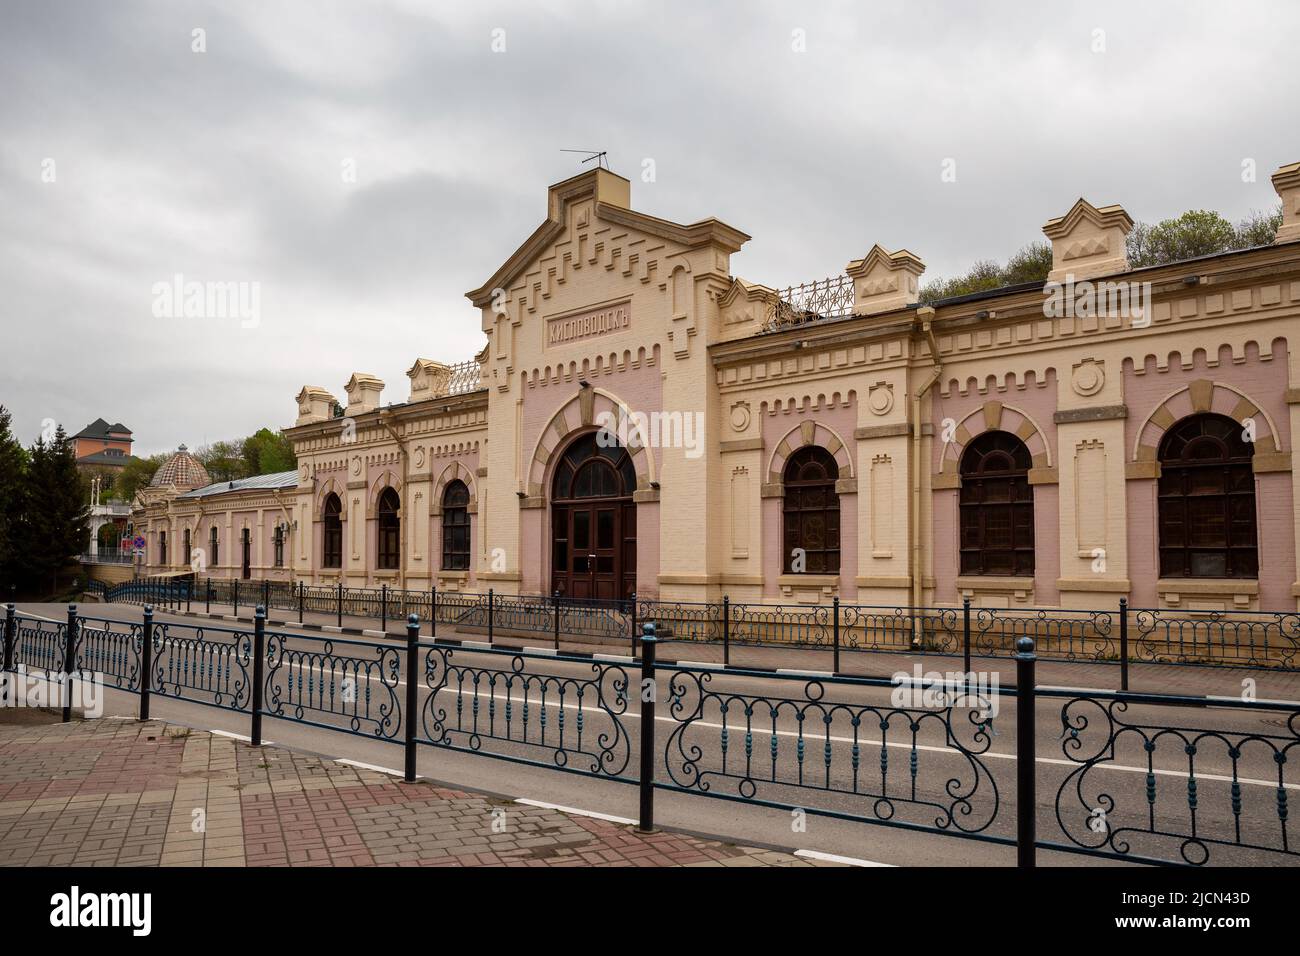 Kislovodsk railway station, historical building of the 19th century in the center of Kislovodsk, Russia Stock Photo